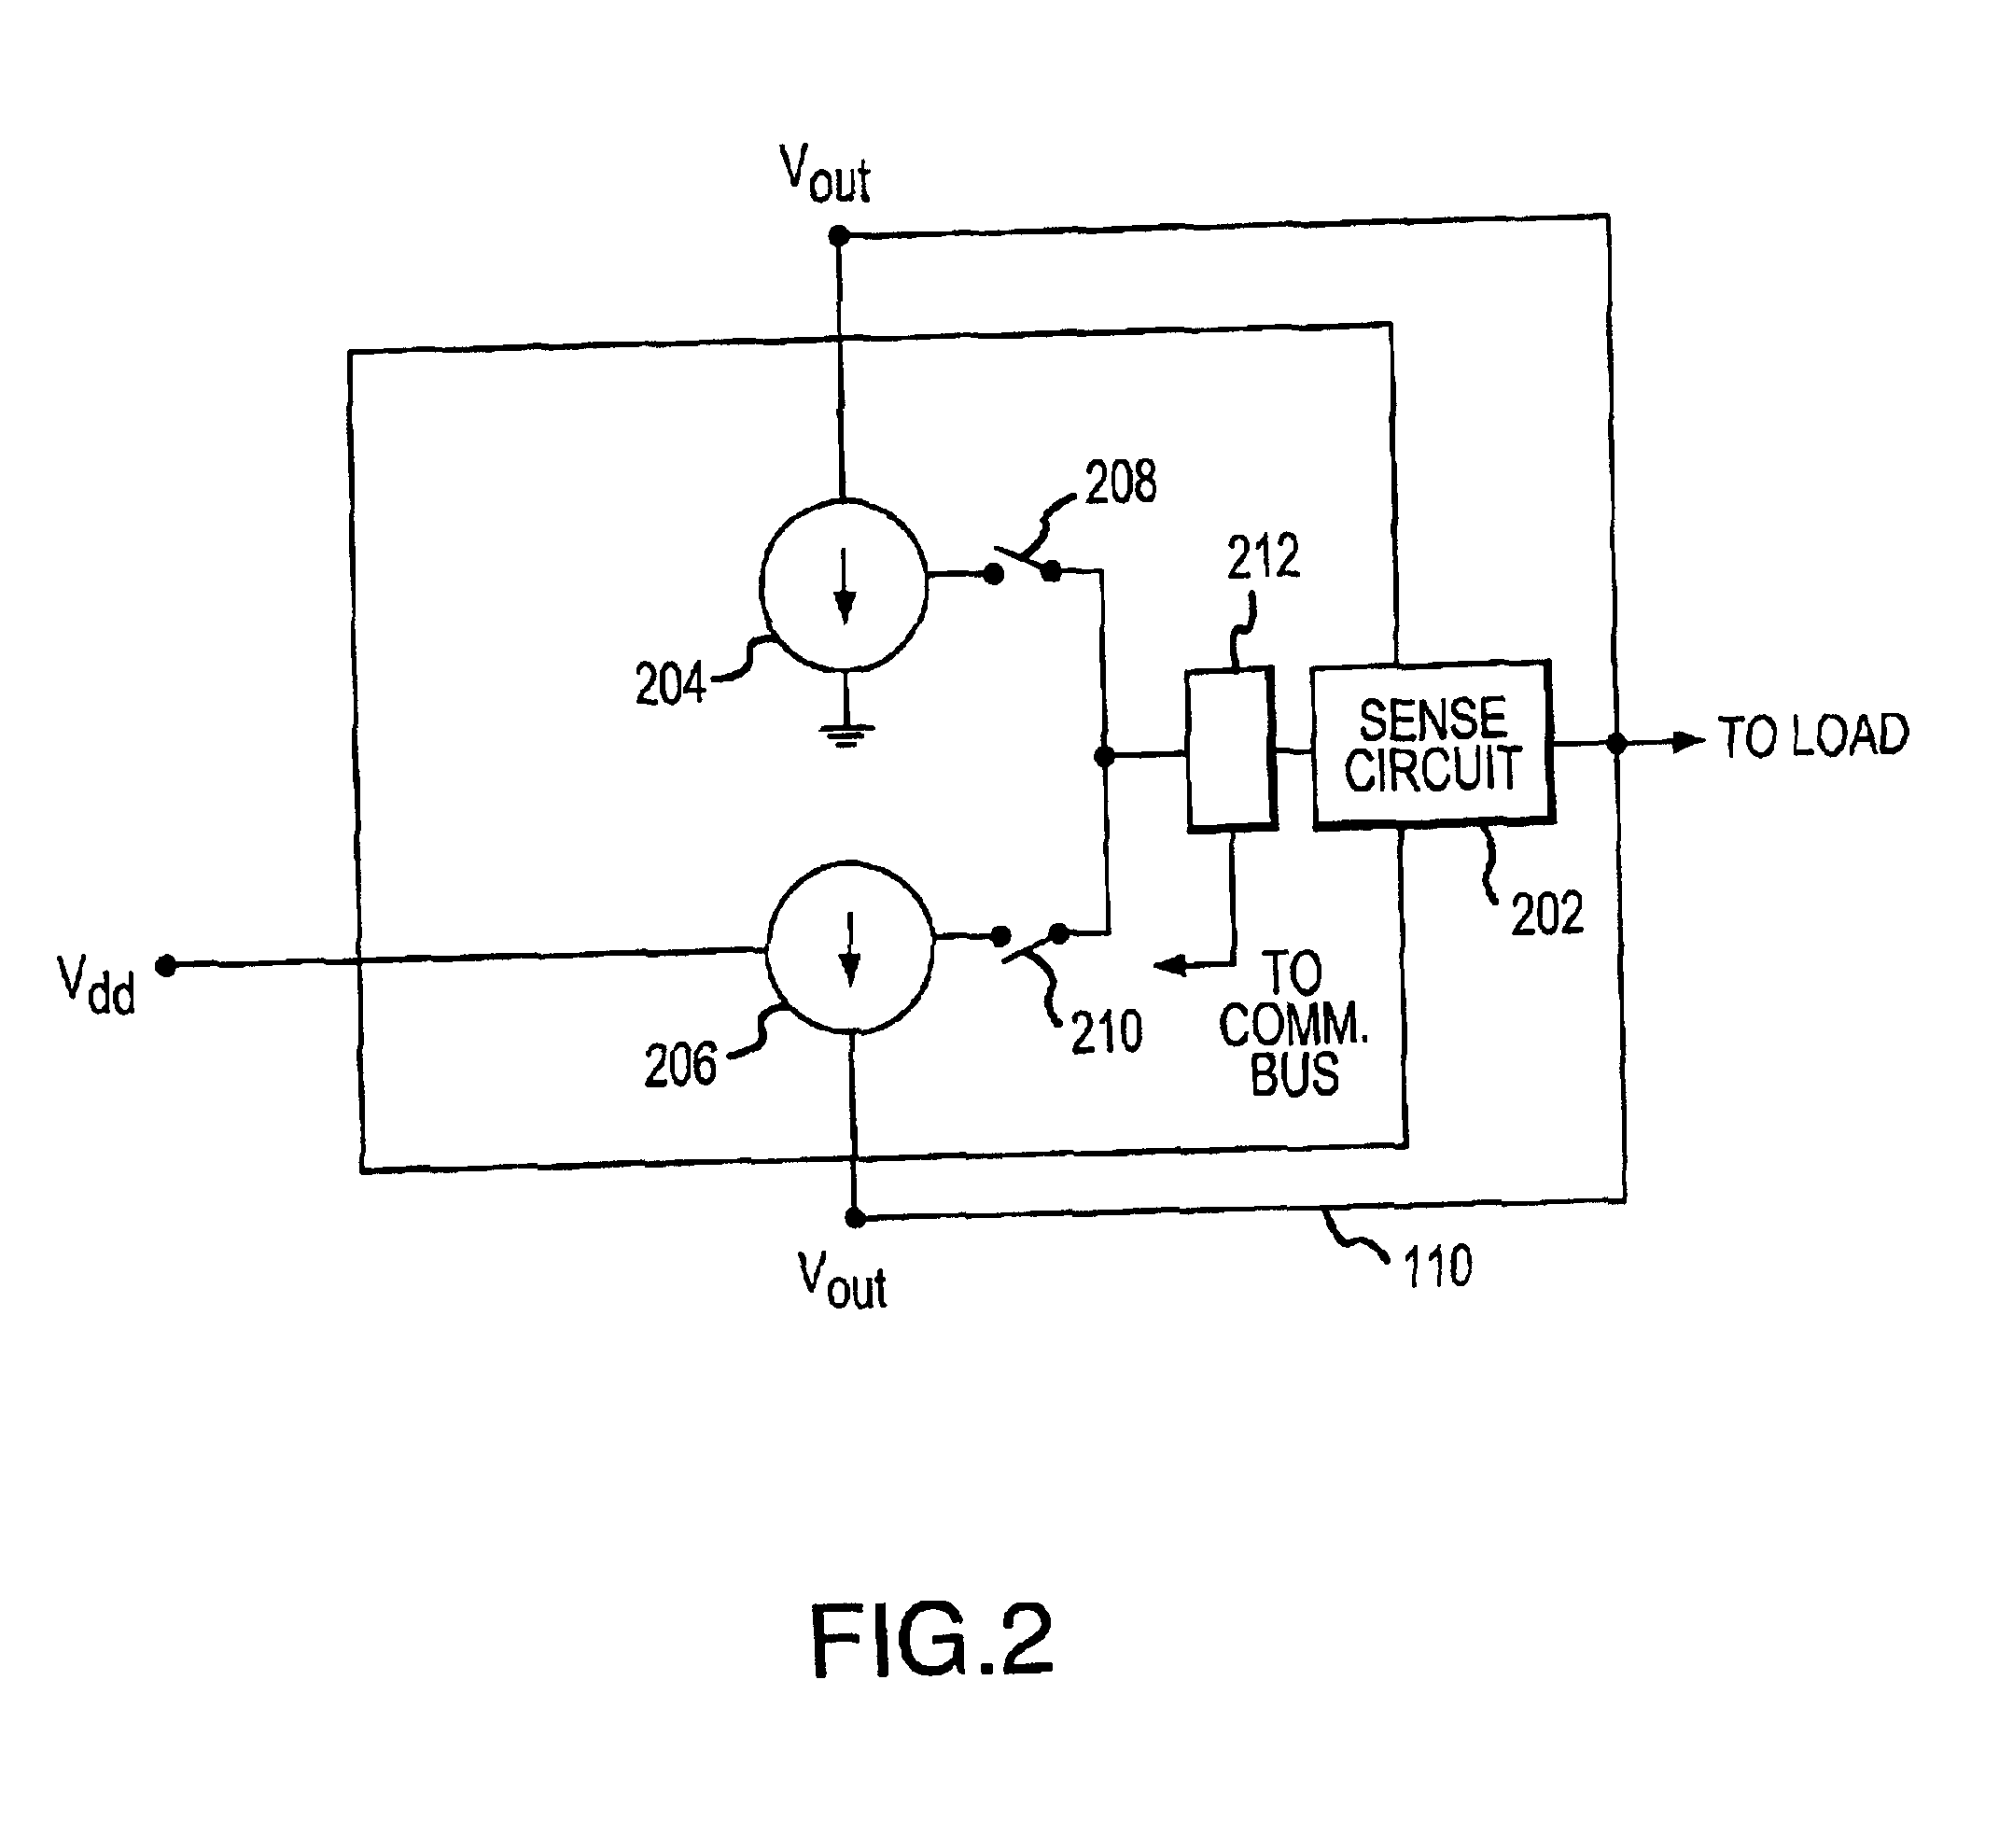 Serial bus control method and apparatus for a microelectronic power regulation system